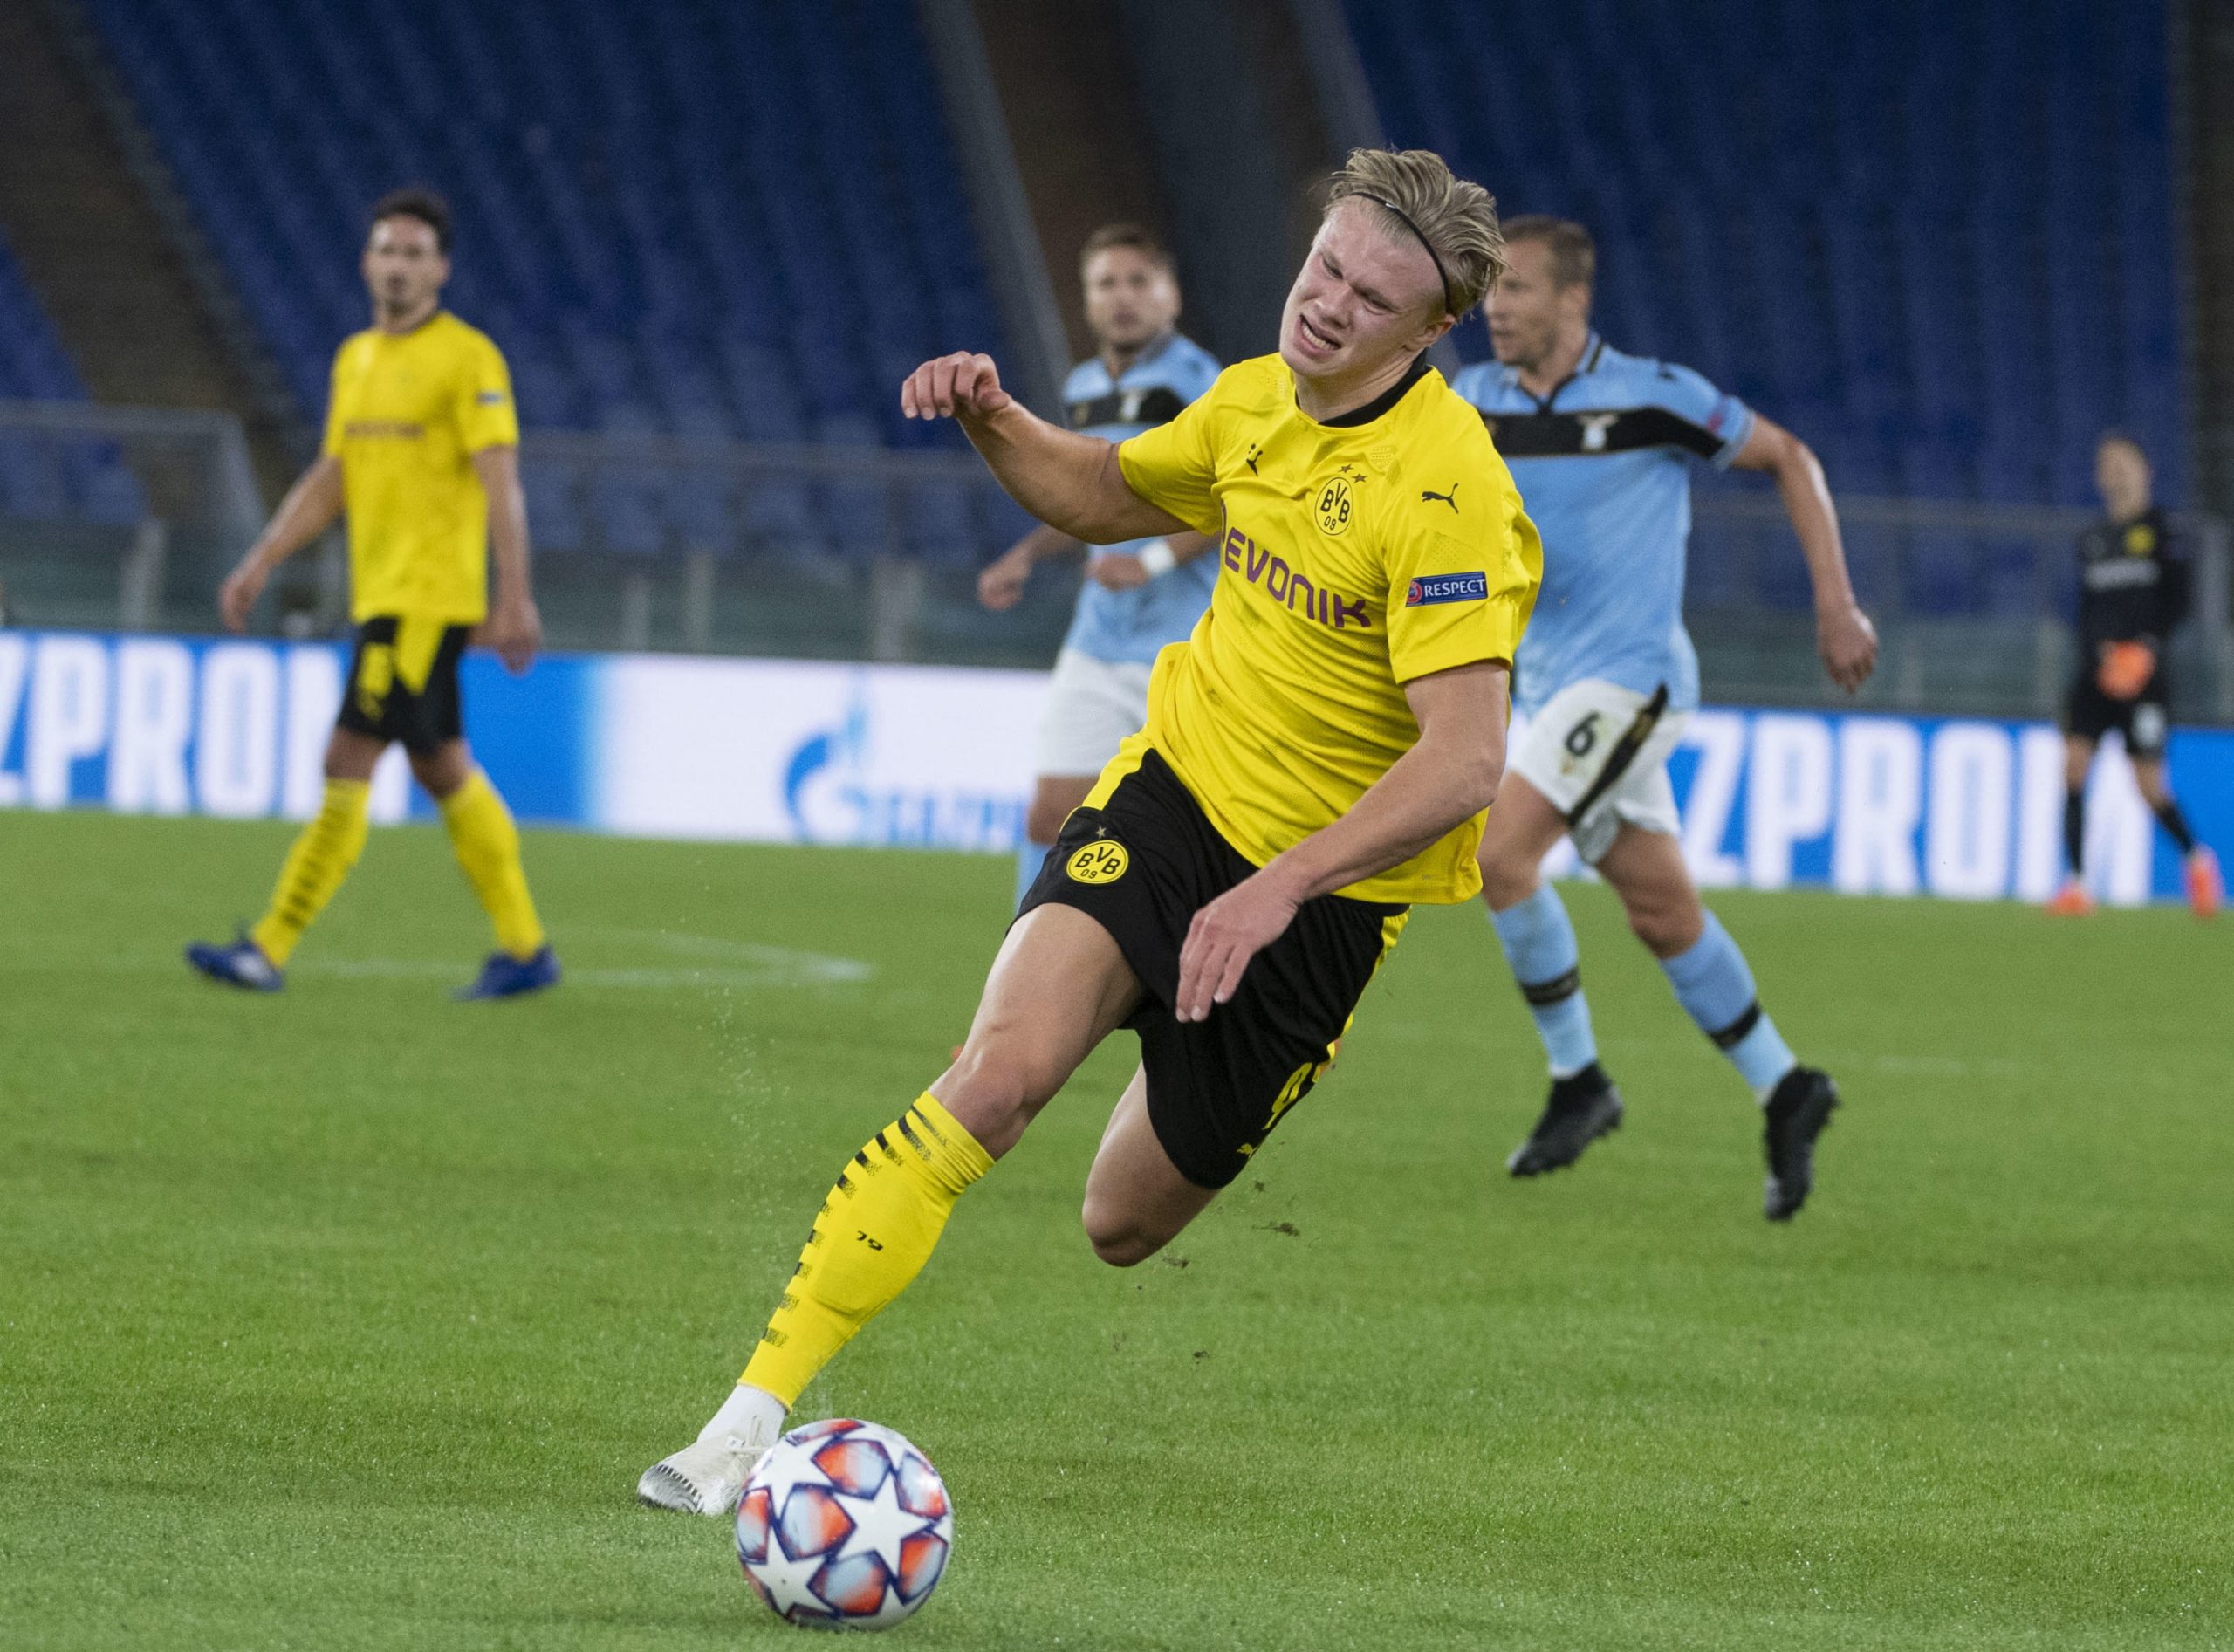 epa08760323 Erling Haaland of Borussia Dortmund in action during the UEFA Champions League  Group F soccer match between SS Lazio and Borussia Dortmund, at Stadio Olimpico in Rome, Italy, 20 October 2020.  EPA/MAURIZIO BRAMBATTI